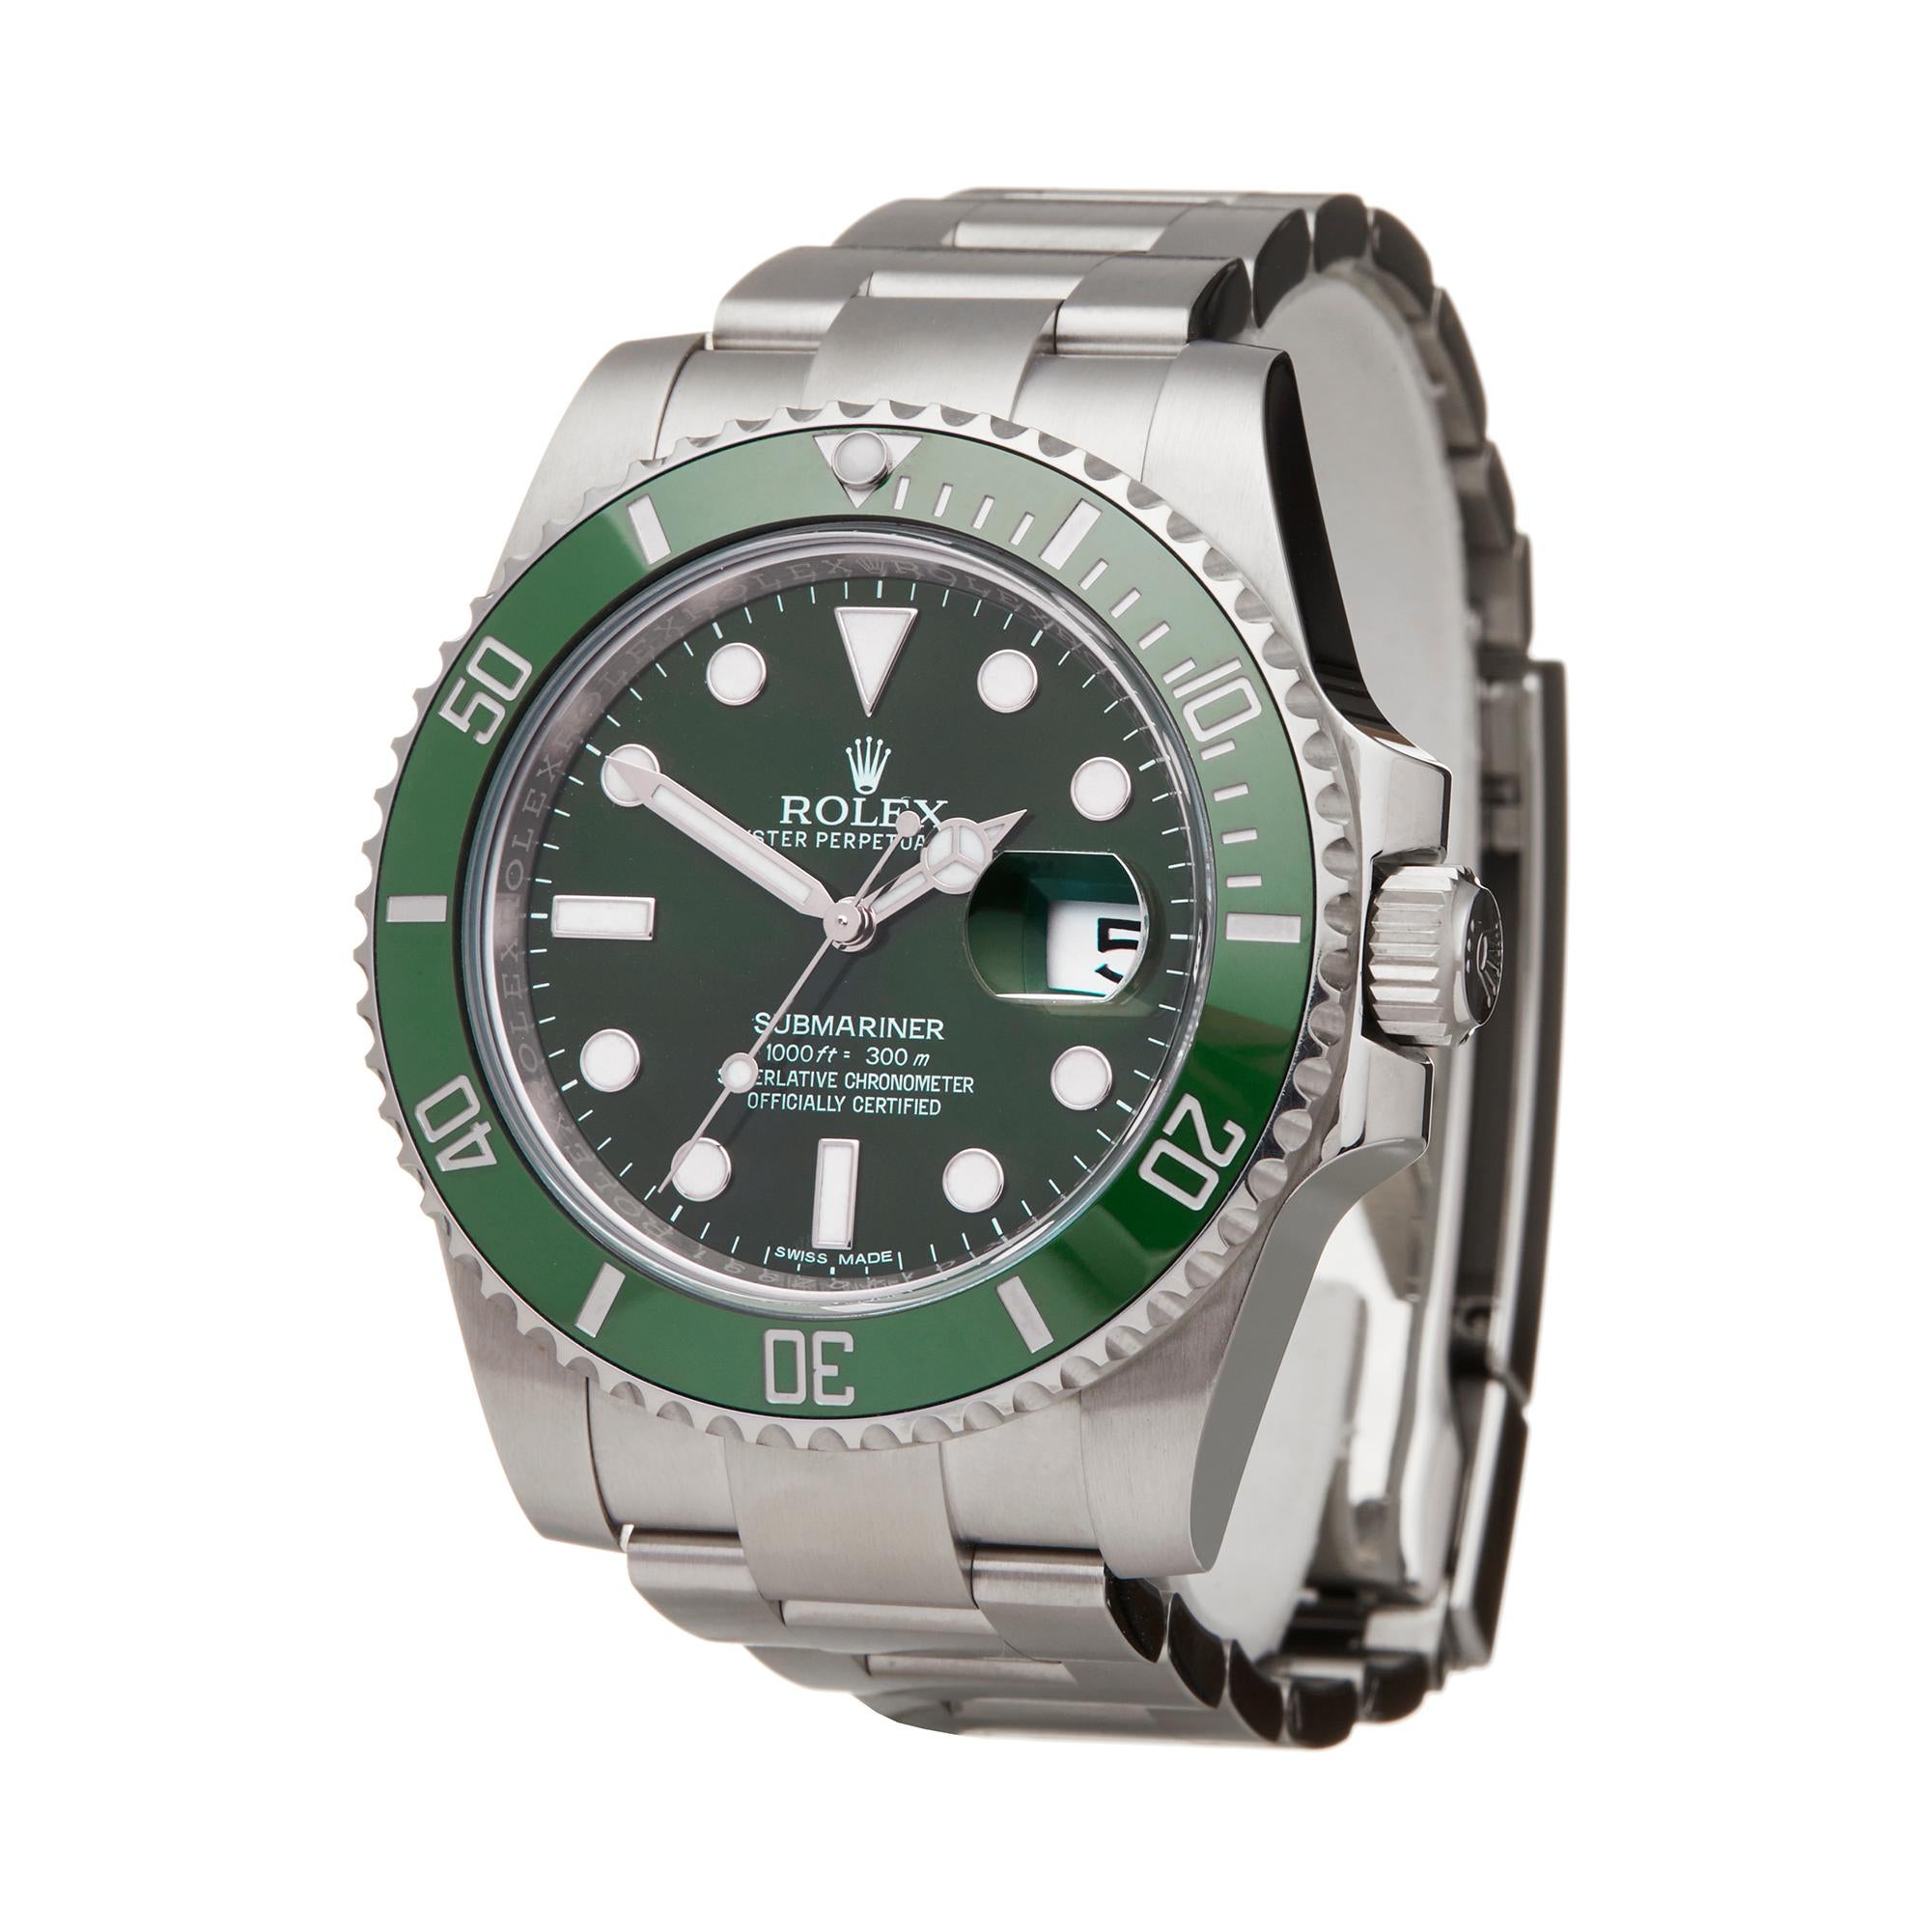 Reference: W5965
Manufacturer: Rolex
Model: Submariner
Model Reference: 116610LV
Age: 21st December 2015
Gender: Men's
Box and Papers: Box, Manuals and Guarantee
Dial: Green
Glass: Sapphire Crystal
Movement: Automatic
Water Resistance: To